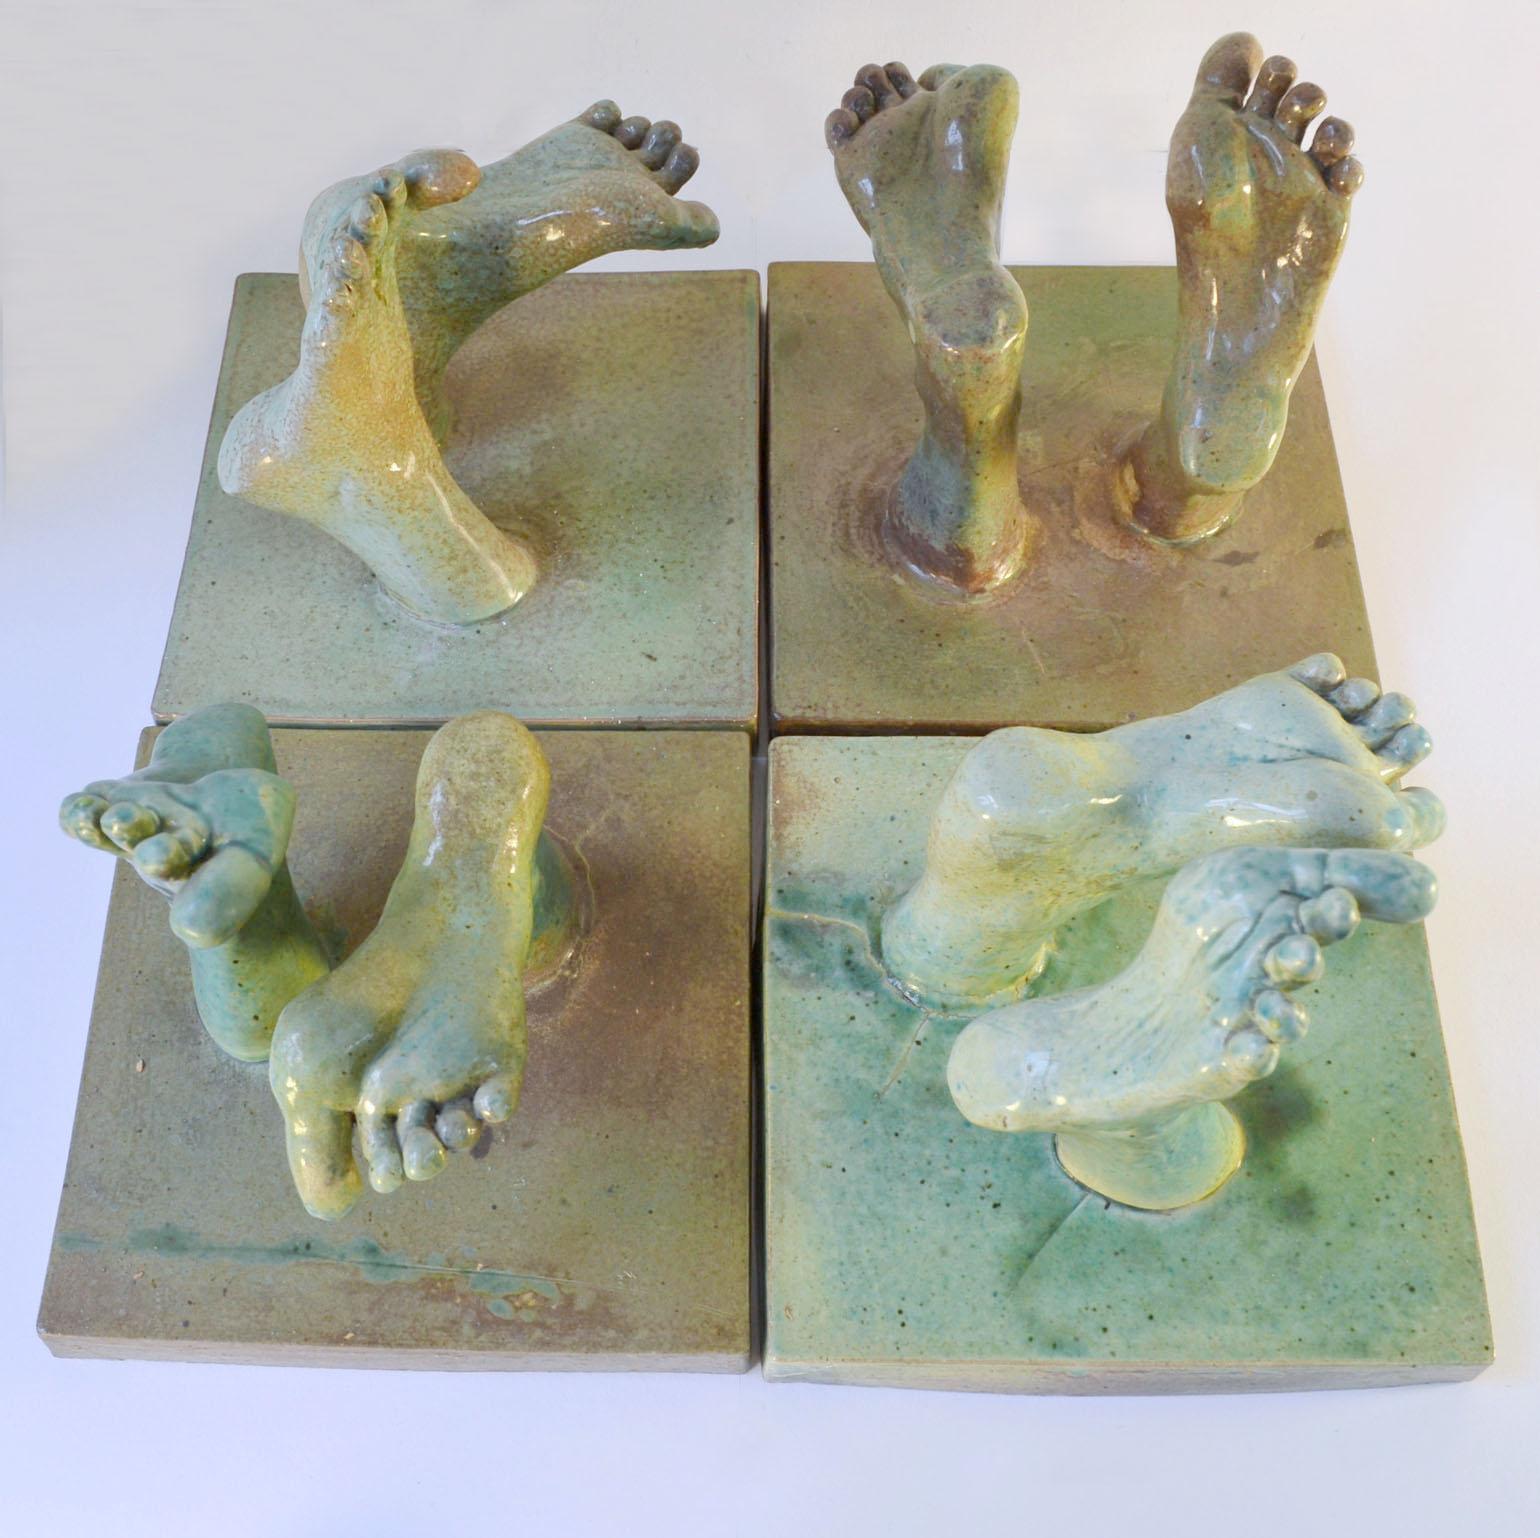 'Bergos' tapestry of feet consists four ceramic tiles made into a relief with feet walking upwards from the tile squares, by Lies Gronheid, 1978. Each tile has two feet cast in ceramic and mounted on the tiles. The green glaze varies from tile to